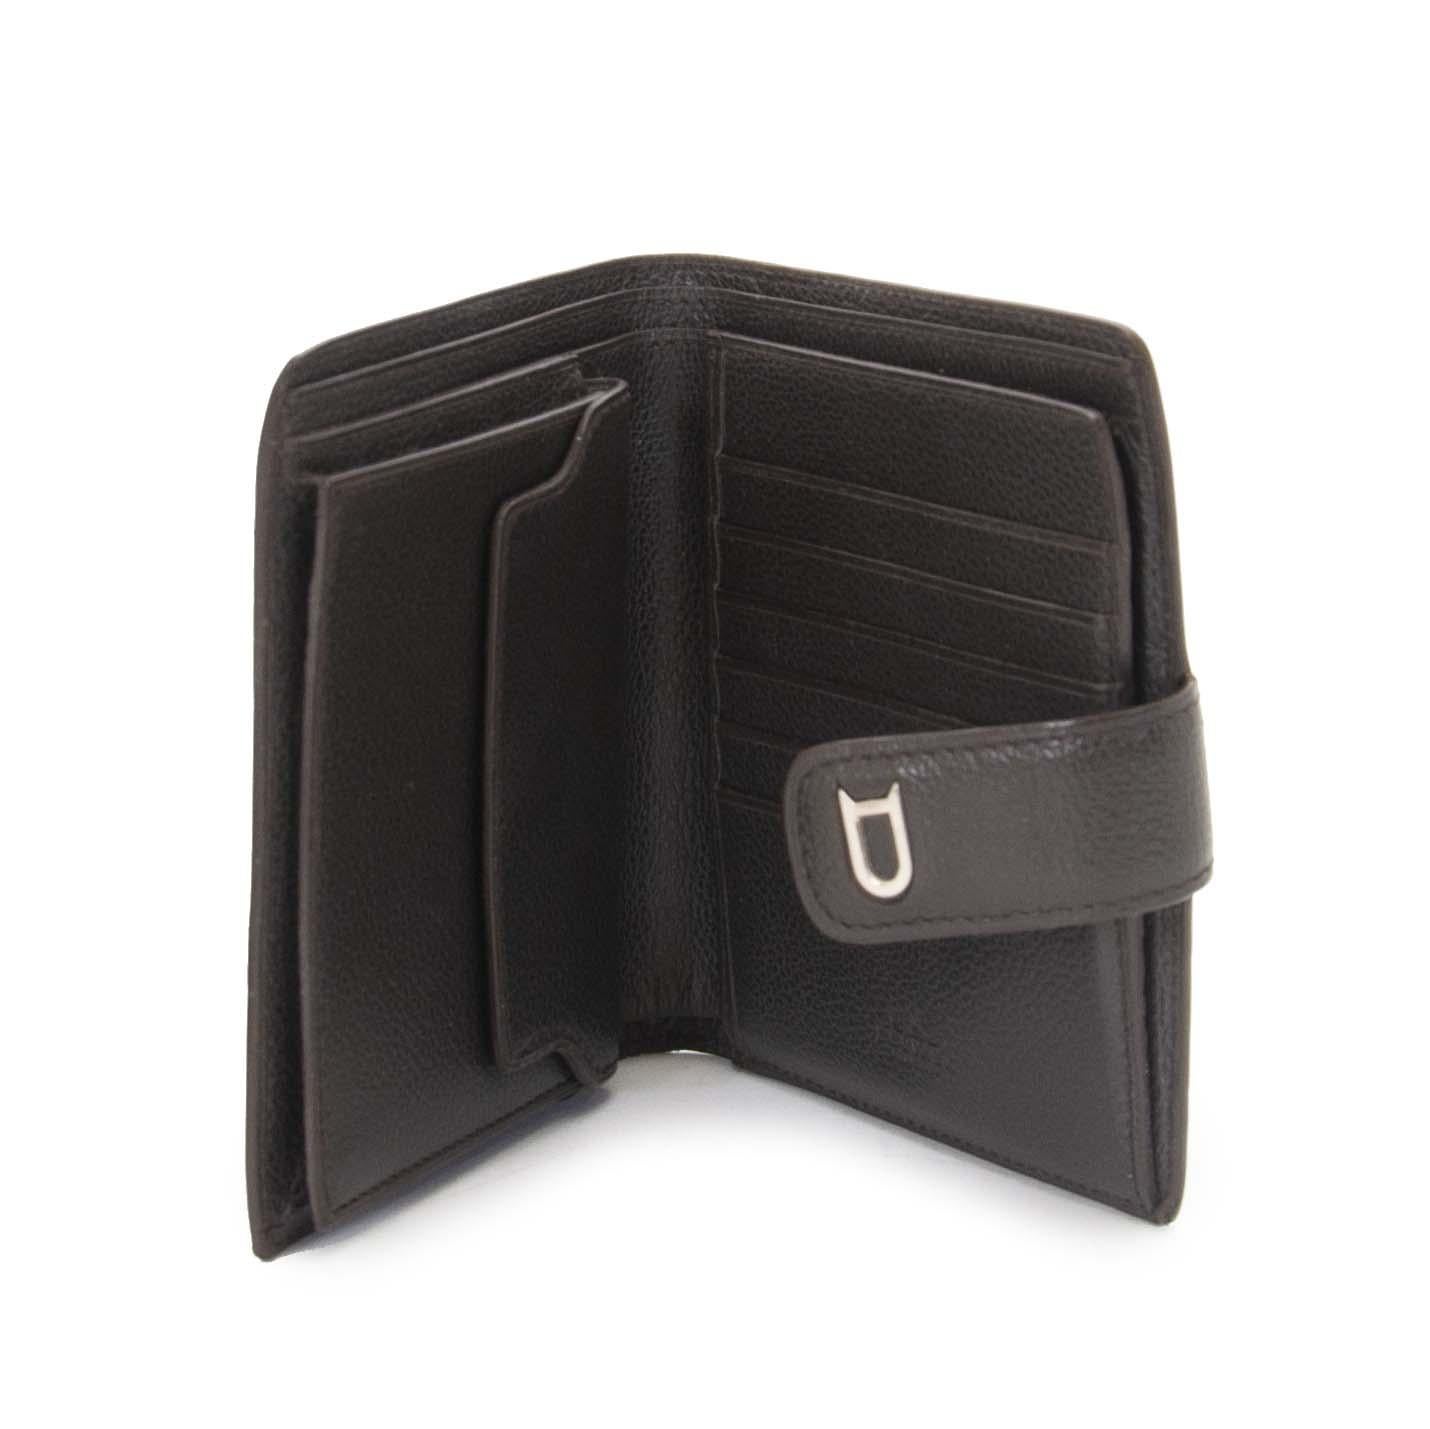 Excellent condition

Delvaux Dark Brown Wallet

This compact wallet by Delvaux is the perfect thing: the wallet is spacious enough for all your cards, coins and bills.

The inside features a coin purse, multiple wallet slots and two pouches for